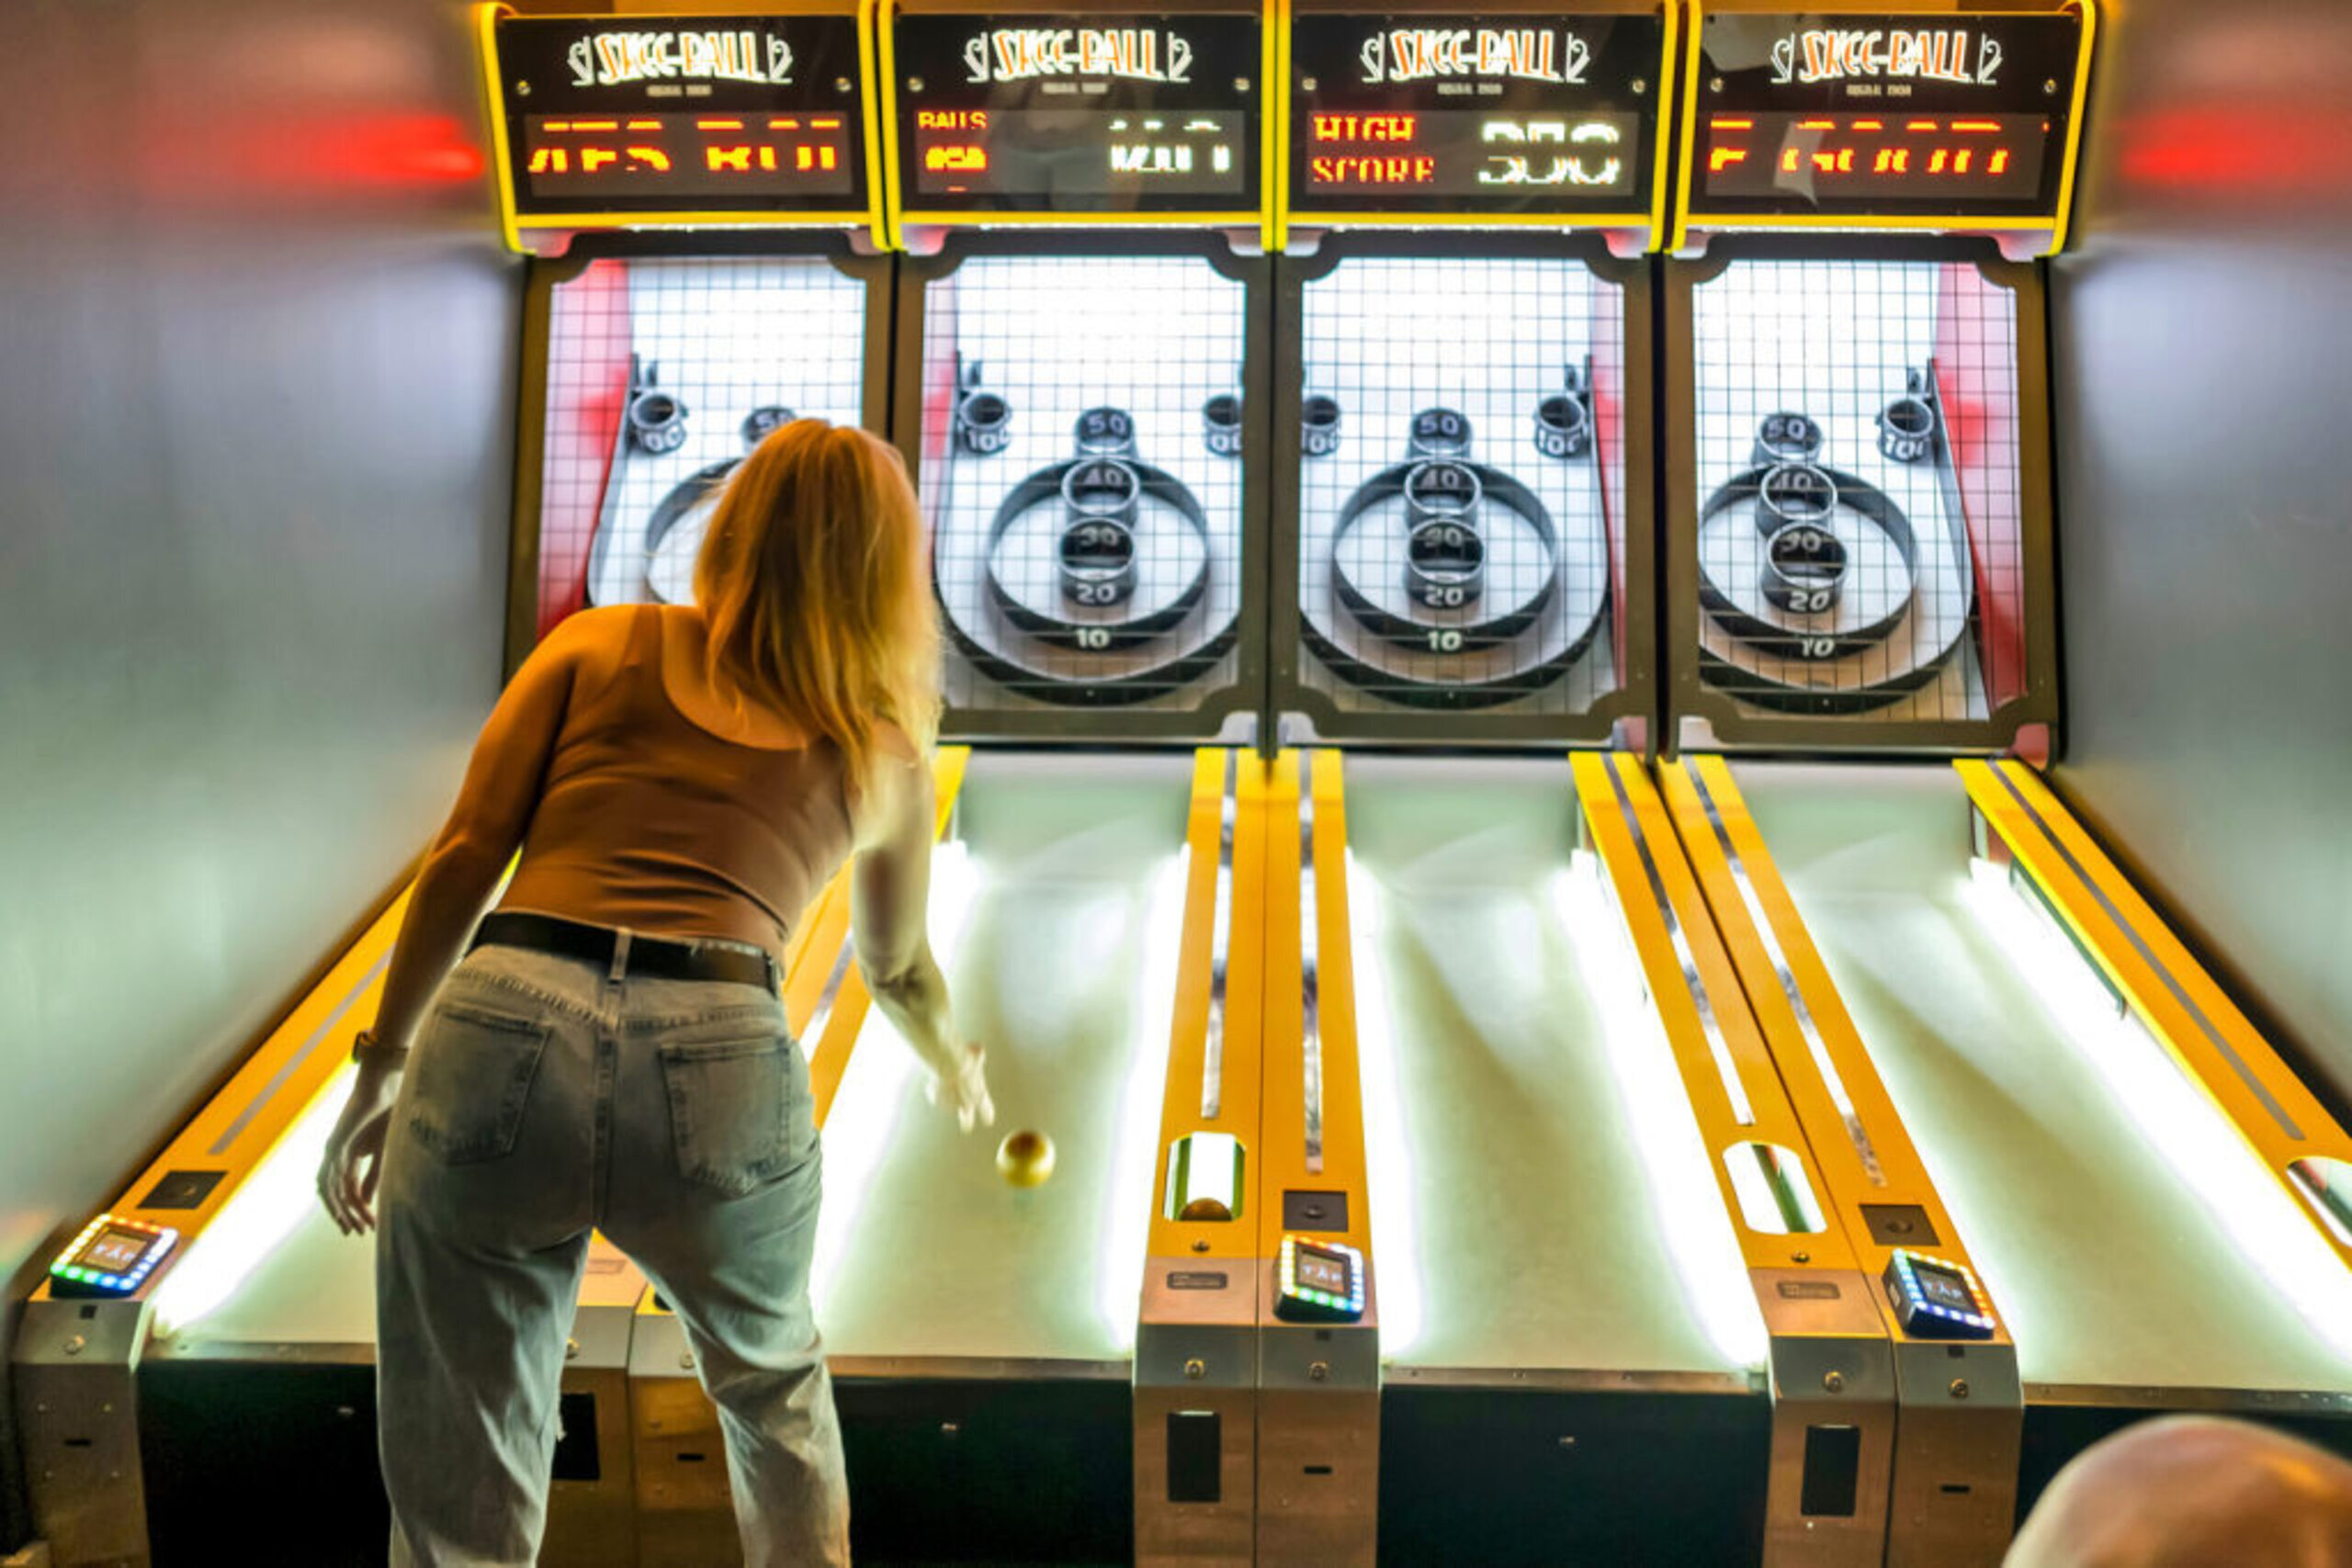 Woman playing Skee-Ball at Sports & Social in Allentown, PA.